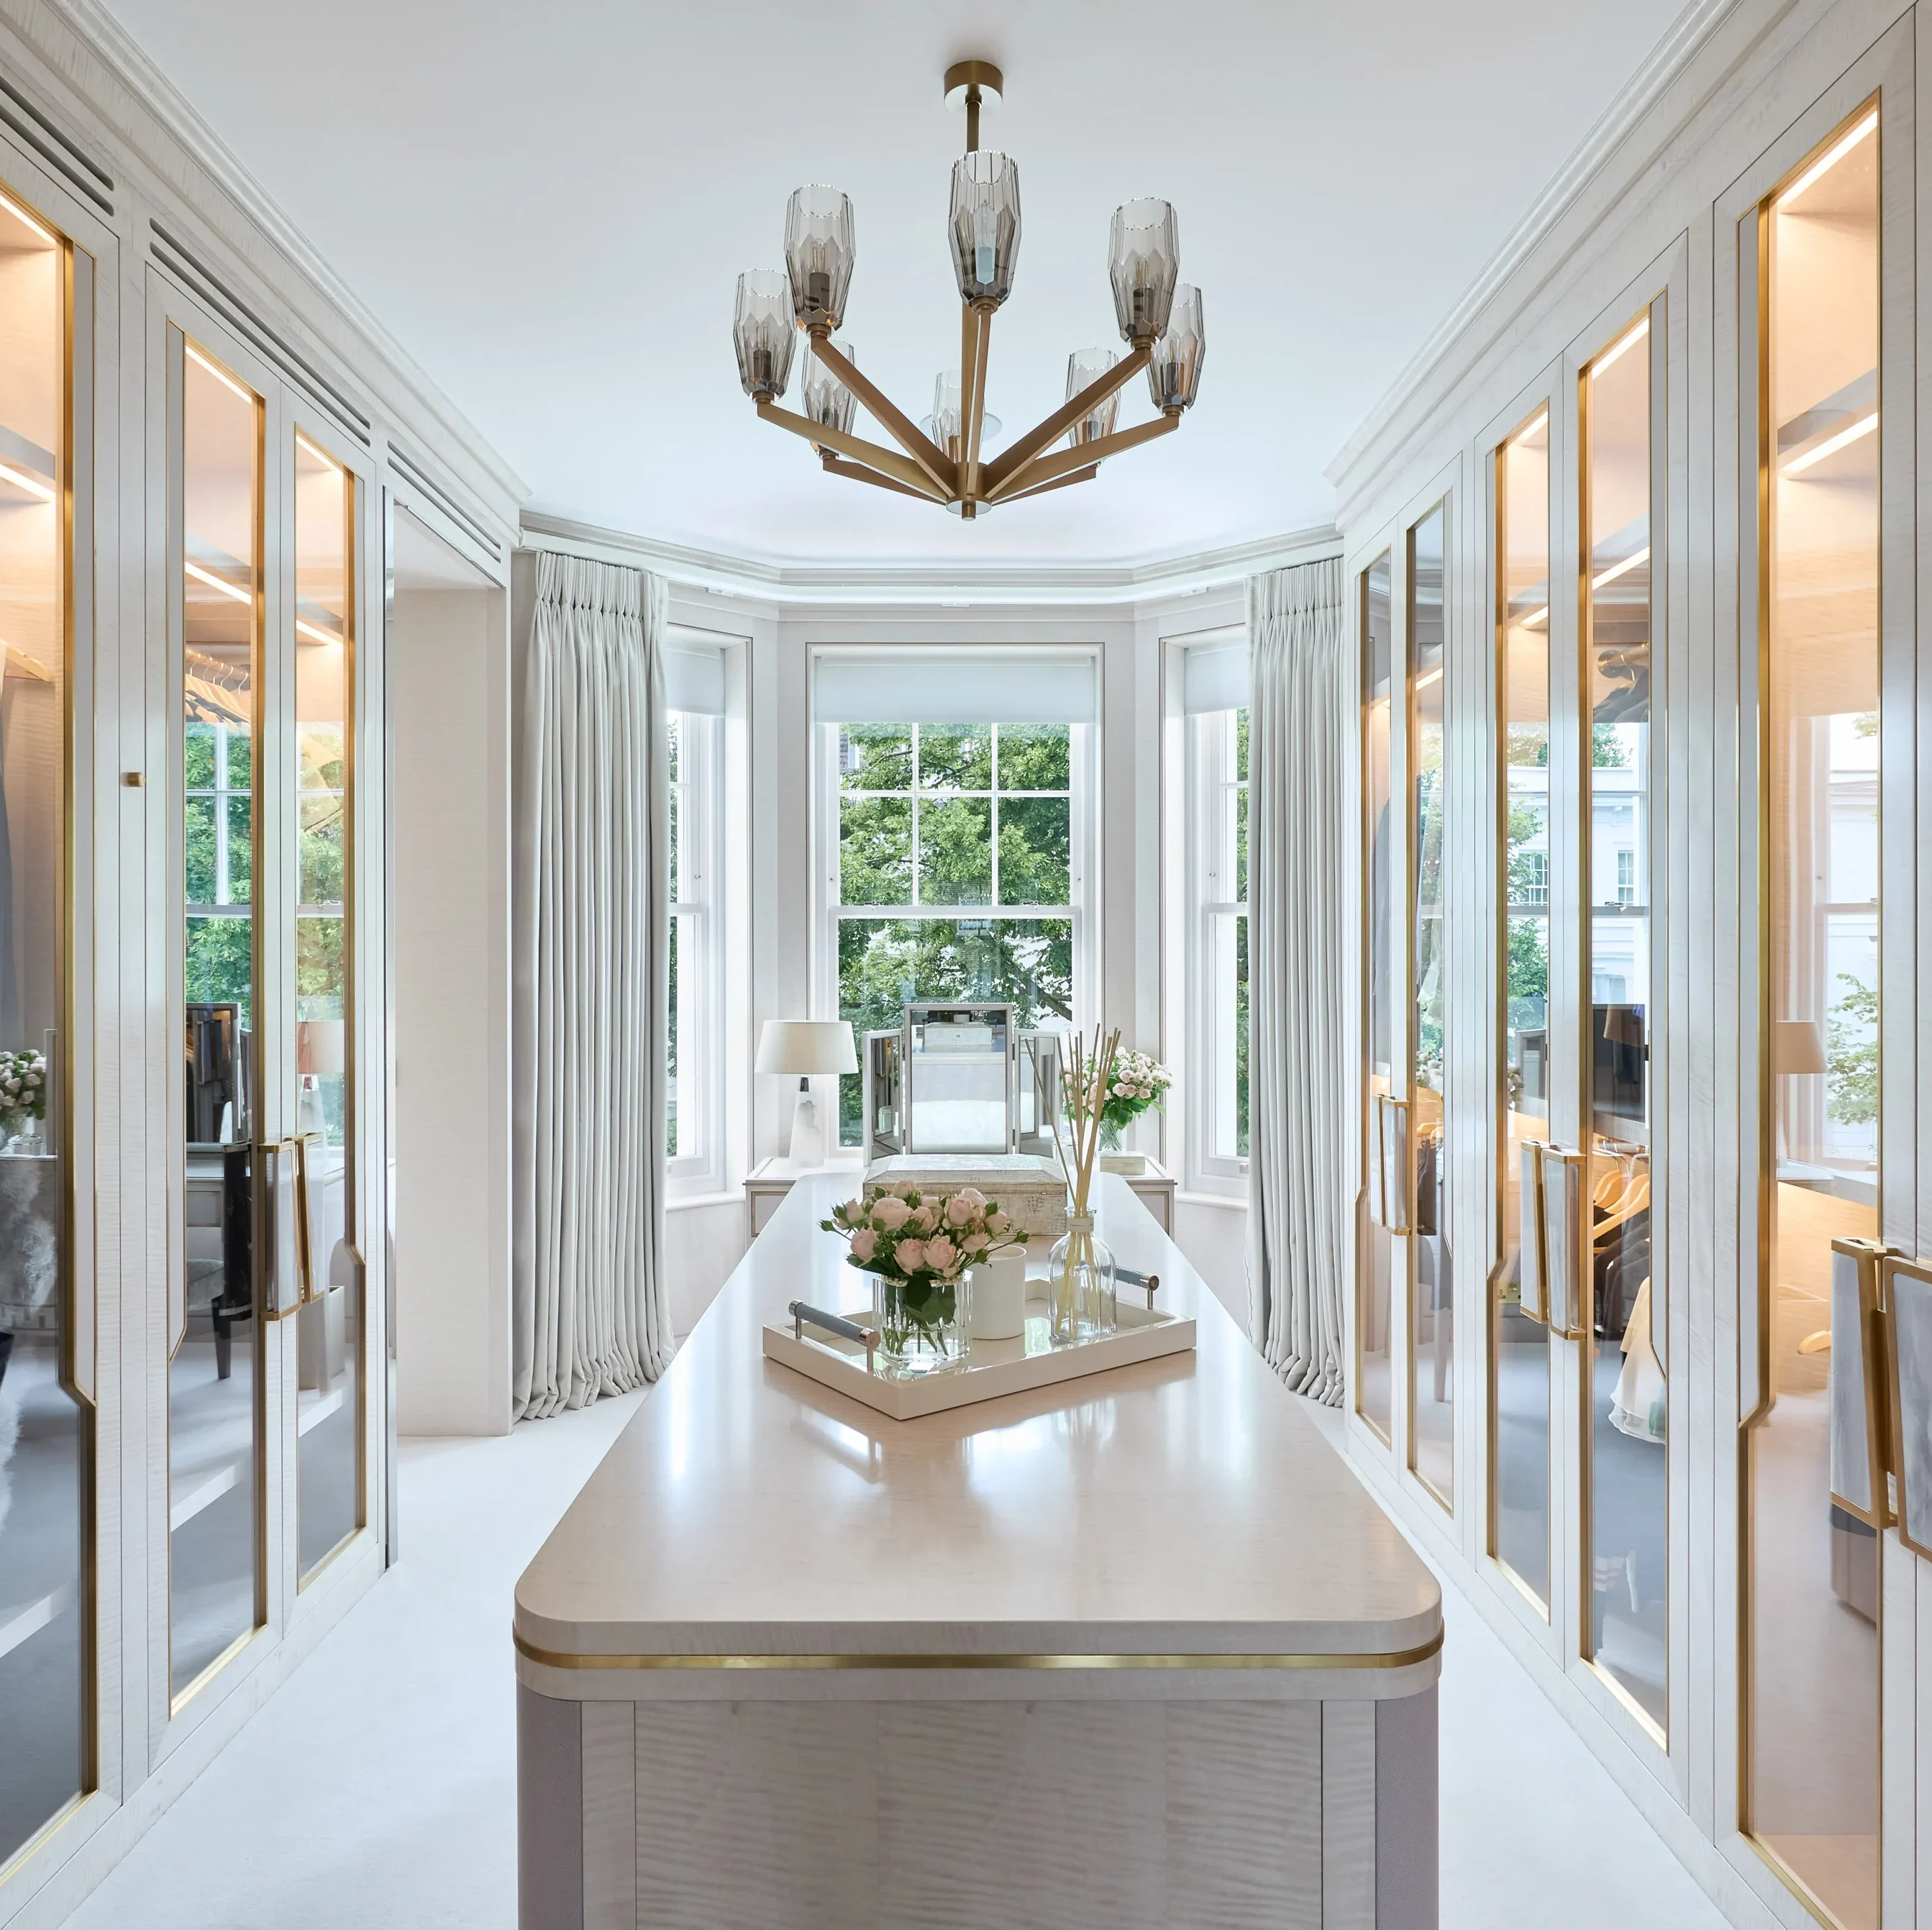 A luxurious dressing room in a notting hill home, interior design and bespoke joinery completed by katharine pooley